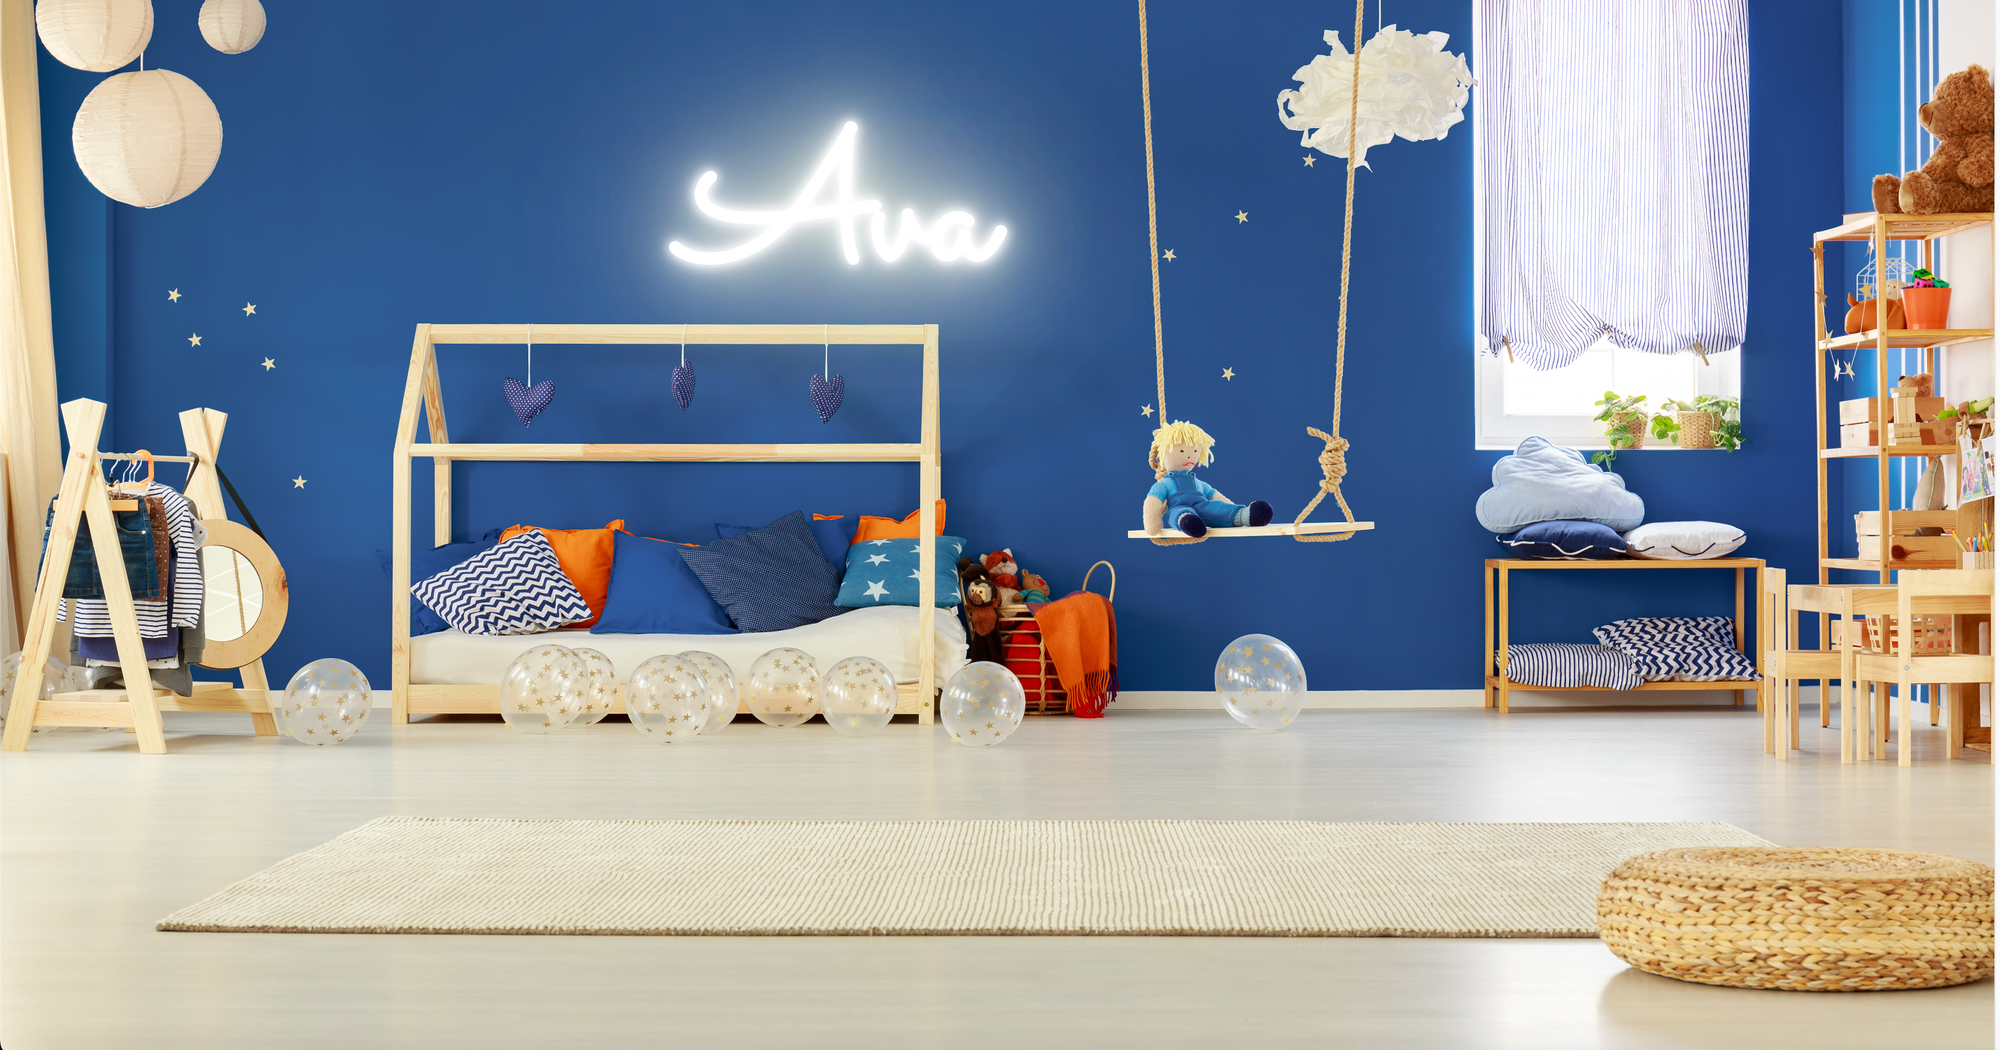 "Ava" Baby Name LED Neon Sign